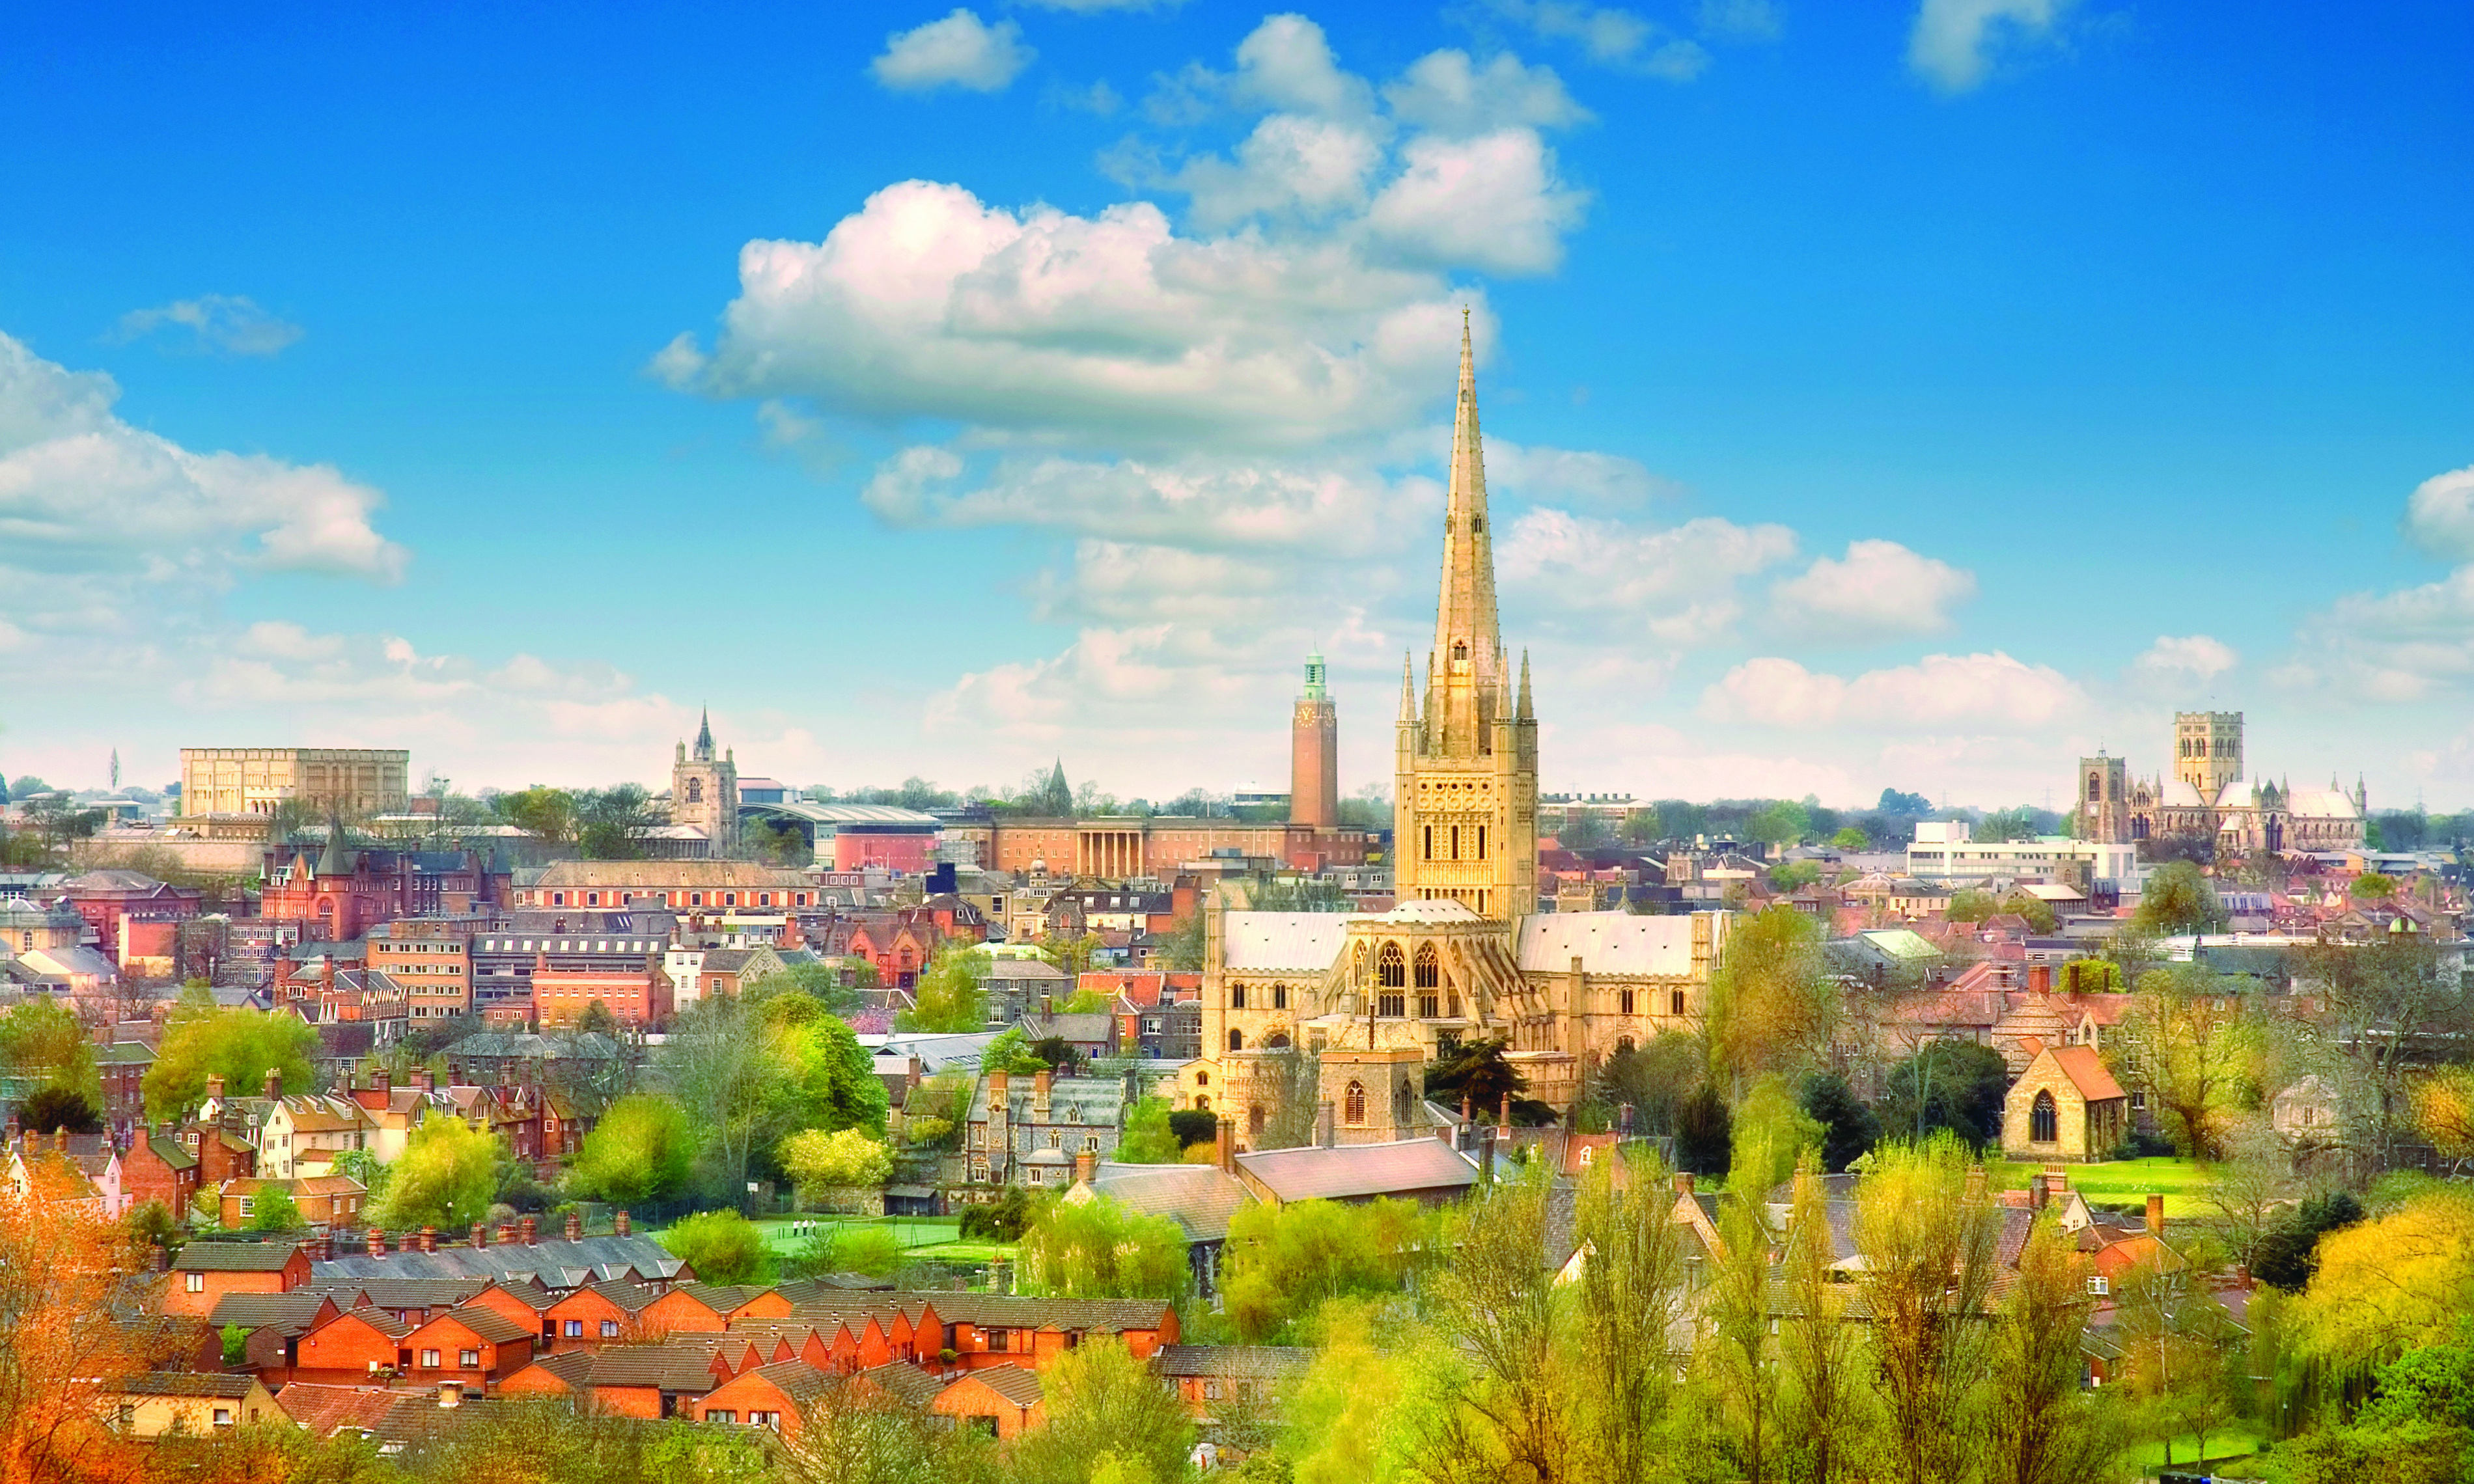 The beautiful Norwich&rsquo;s cathedral